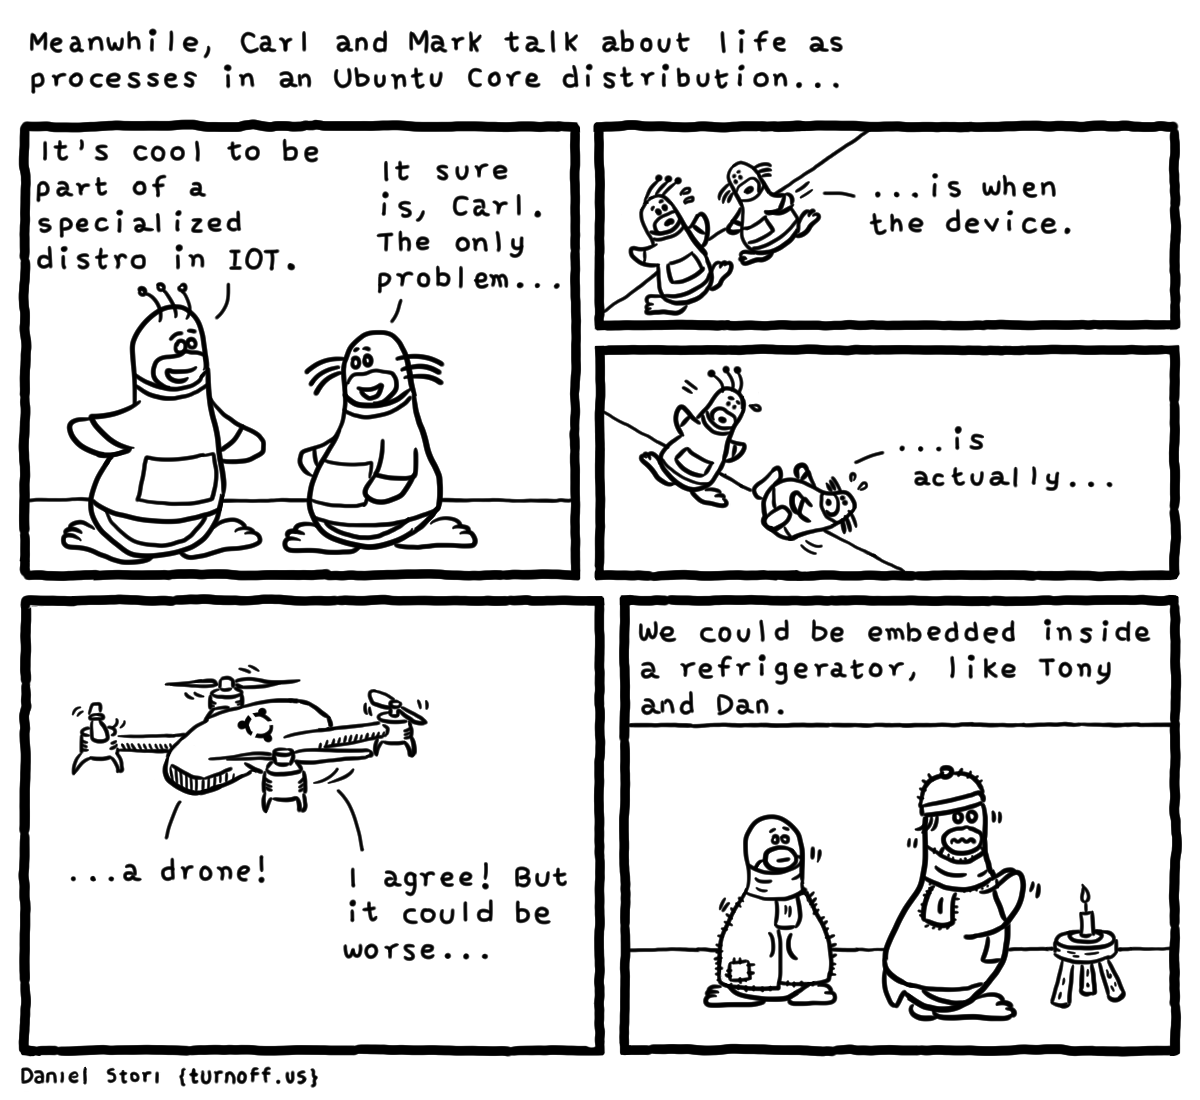 life of embedded processes geek comic